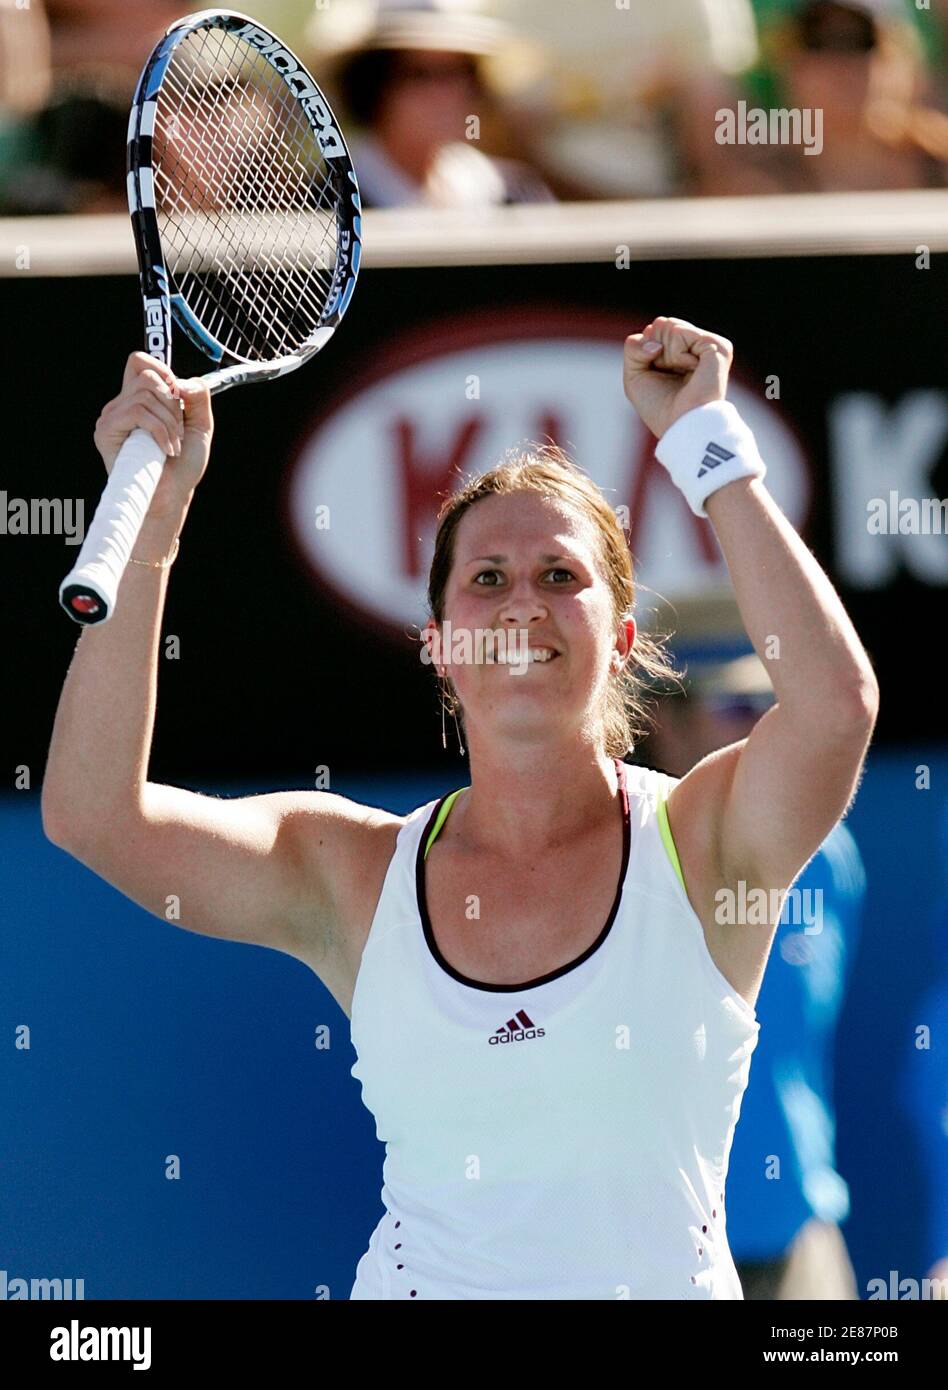 Sweden's Sofia Arvidsson celebrates her victory over France's Marion  Bartoli at the Australian Open tennis tournament in Melbourne, January 15,  2008. REUTERS/Mick Tsikas (AUSTRALIA Stock Photo - Alamy